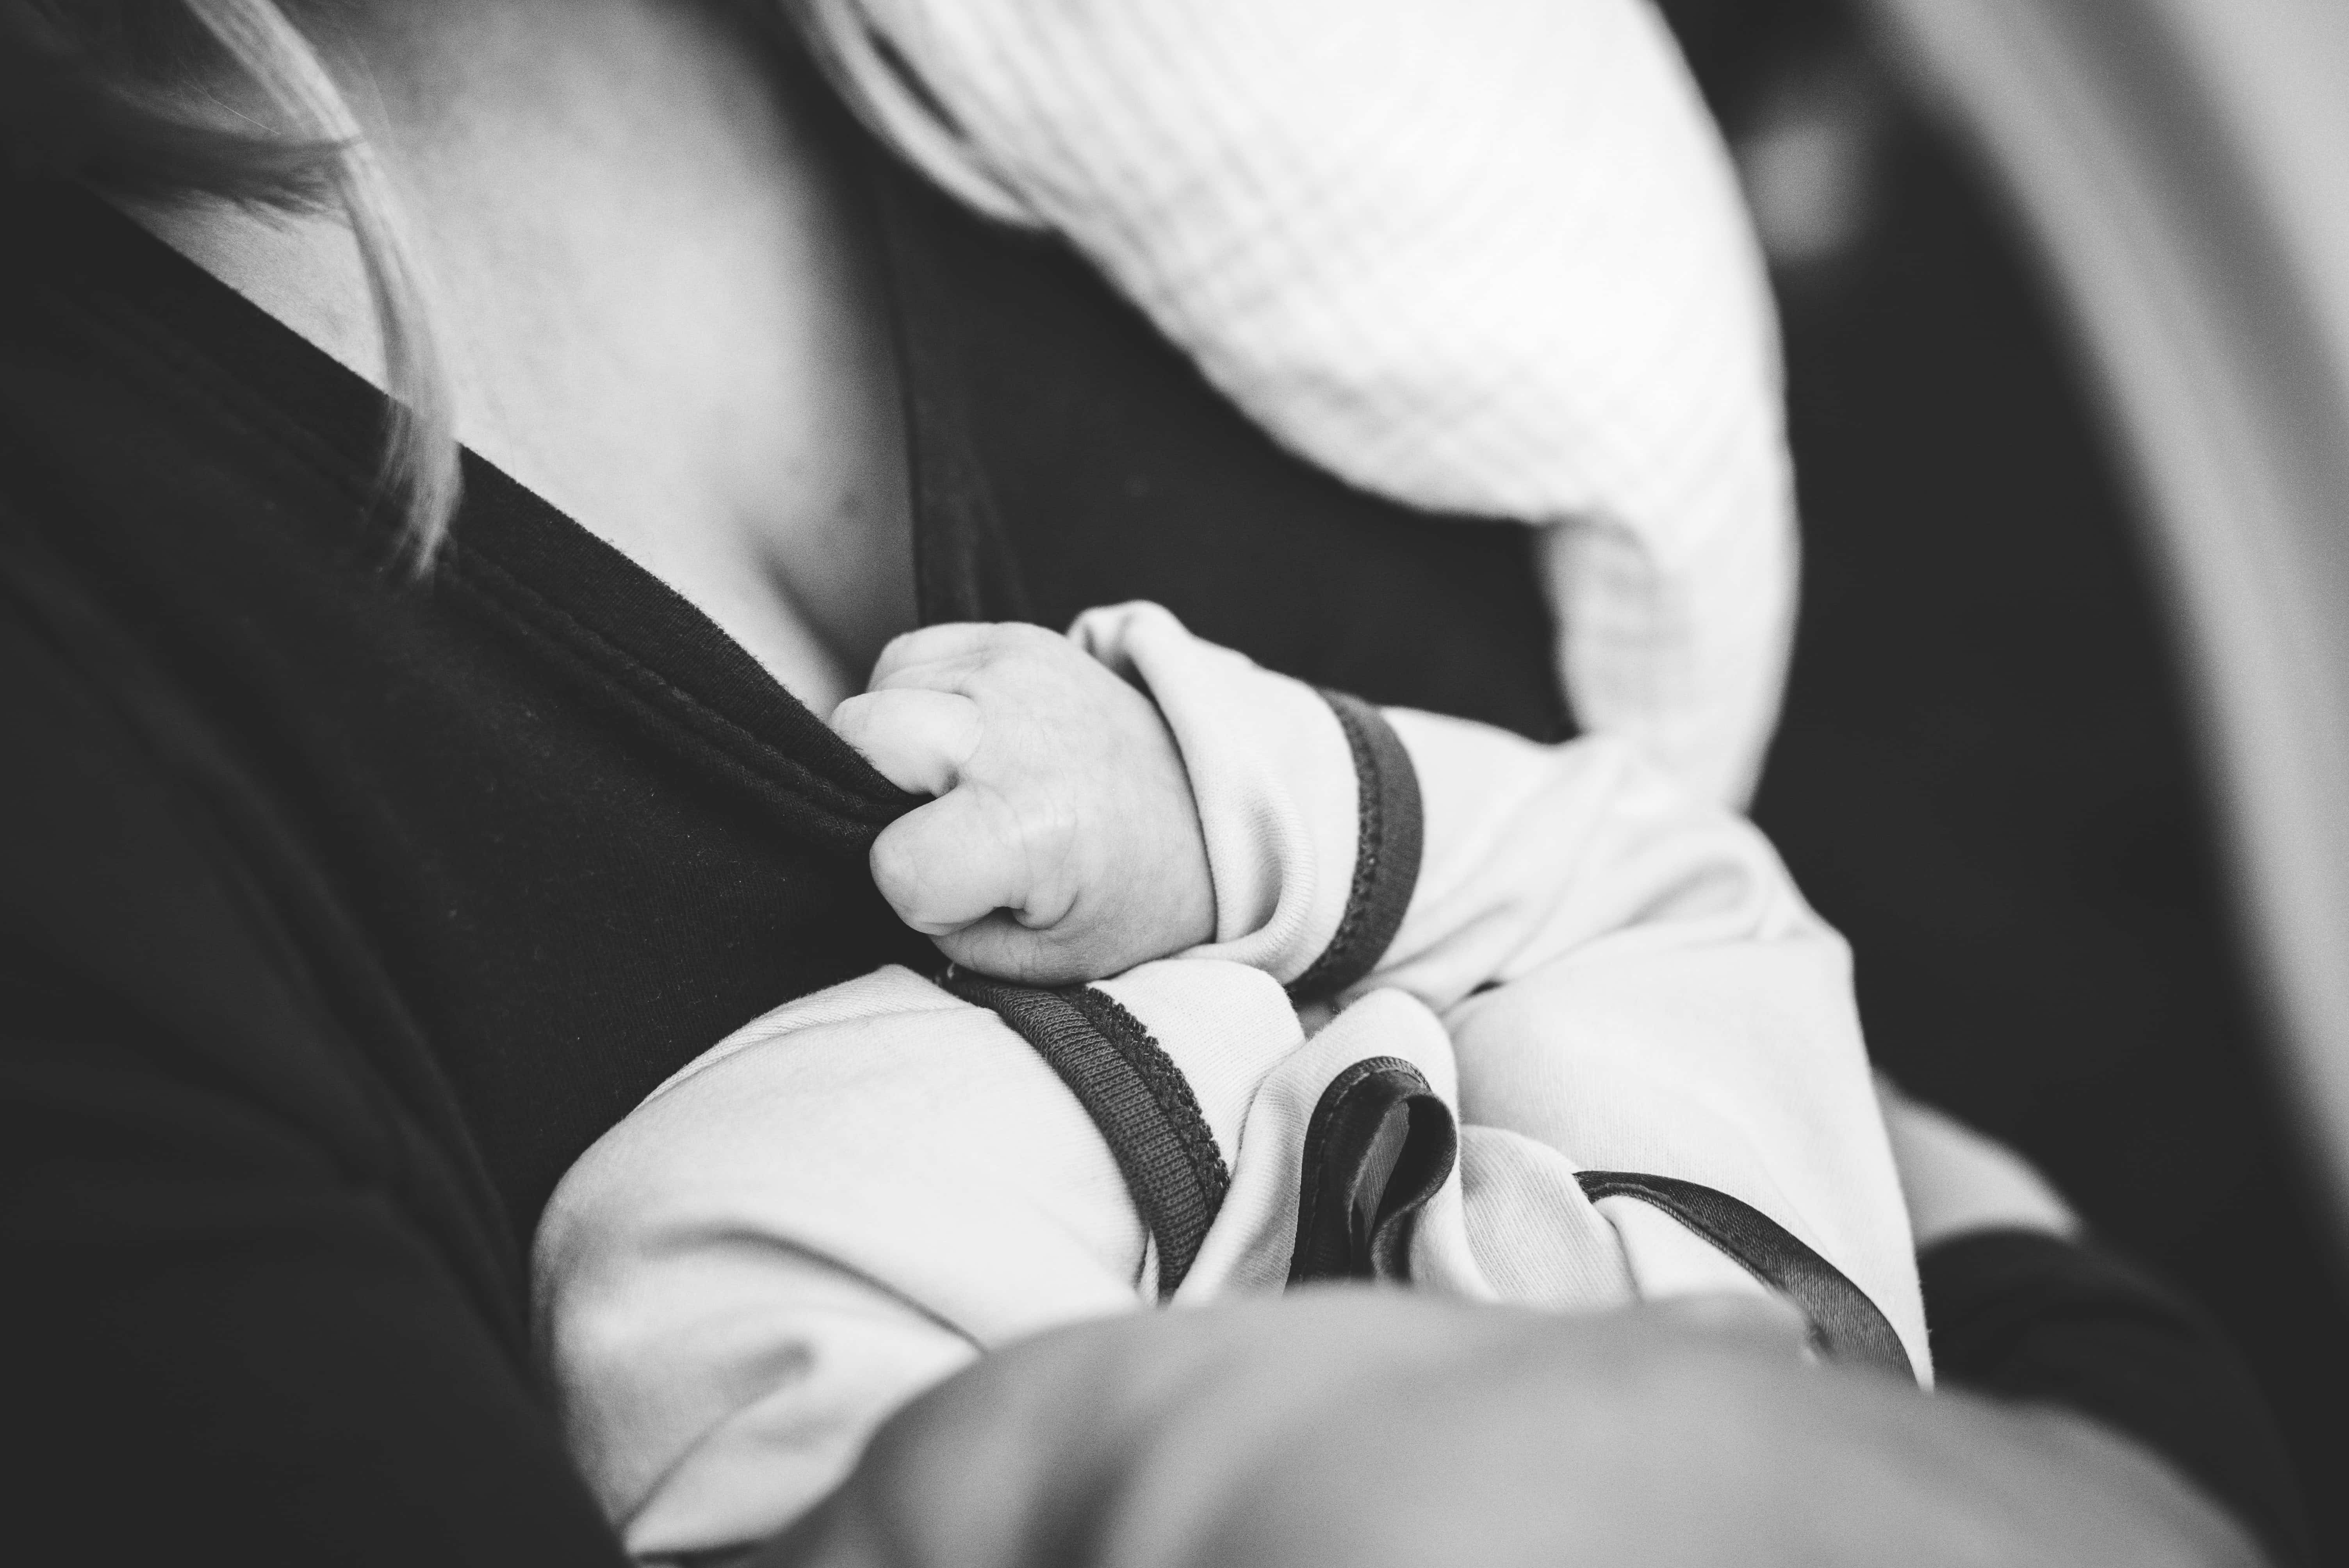 Breastfeeding: The importance to get some support and guidance